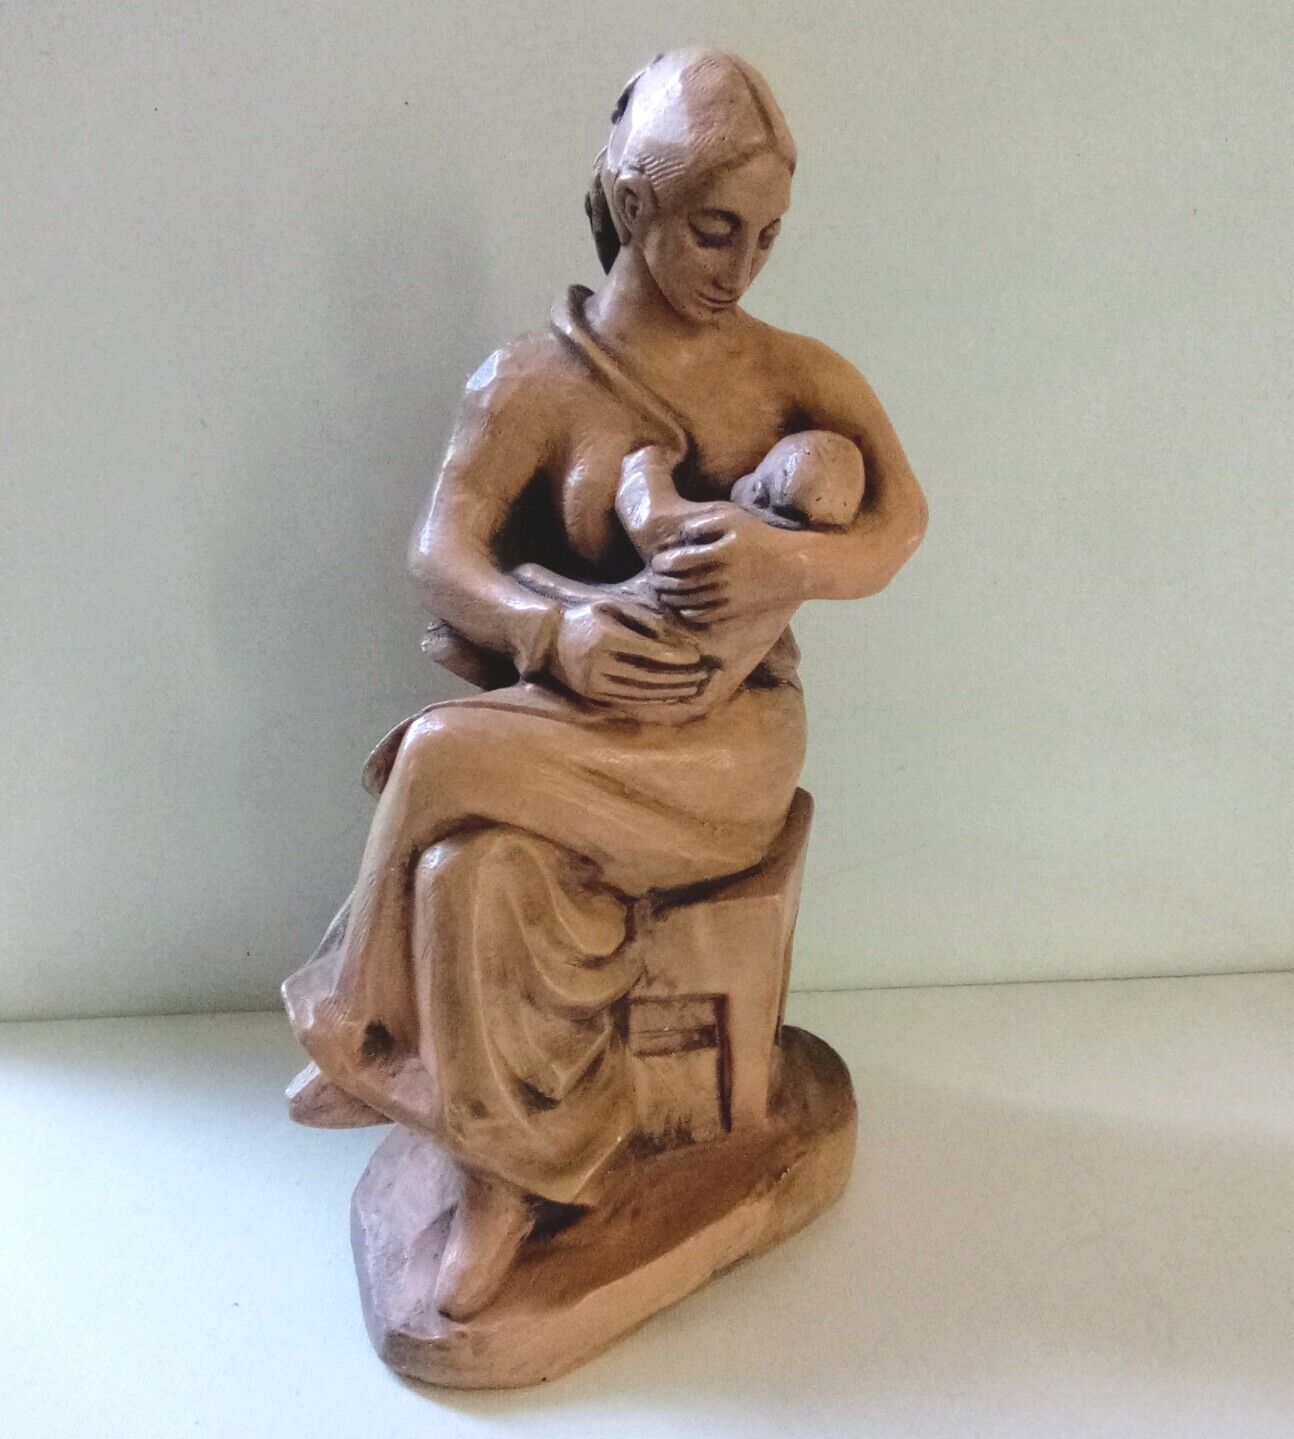 Rare 1975 Abbey Press Figurine of a Mother Nursing her Baby. St. Meinrad Indiana